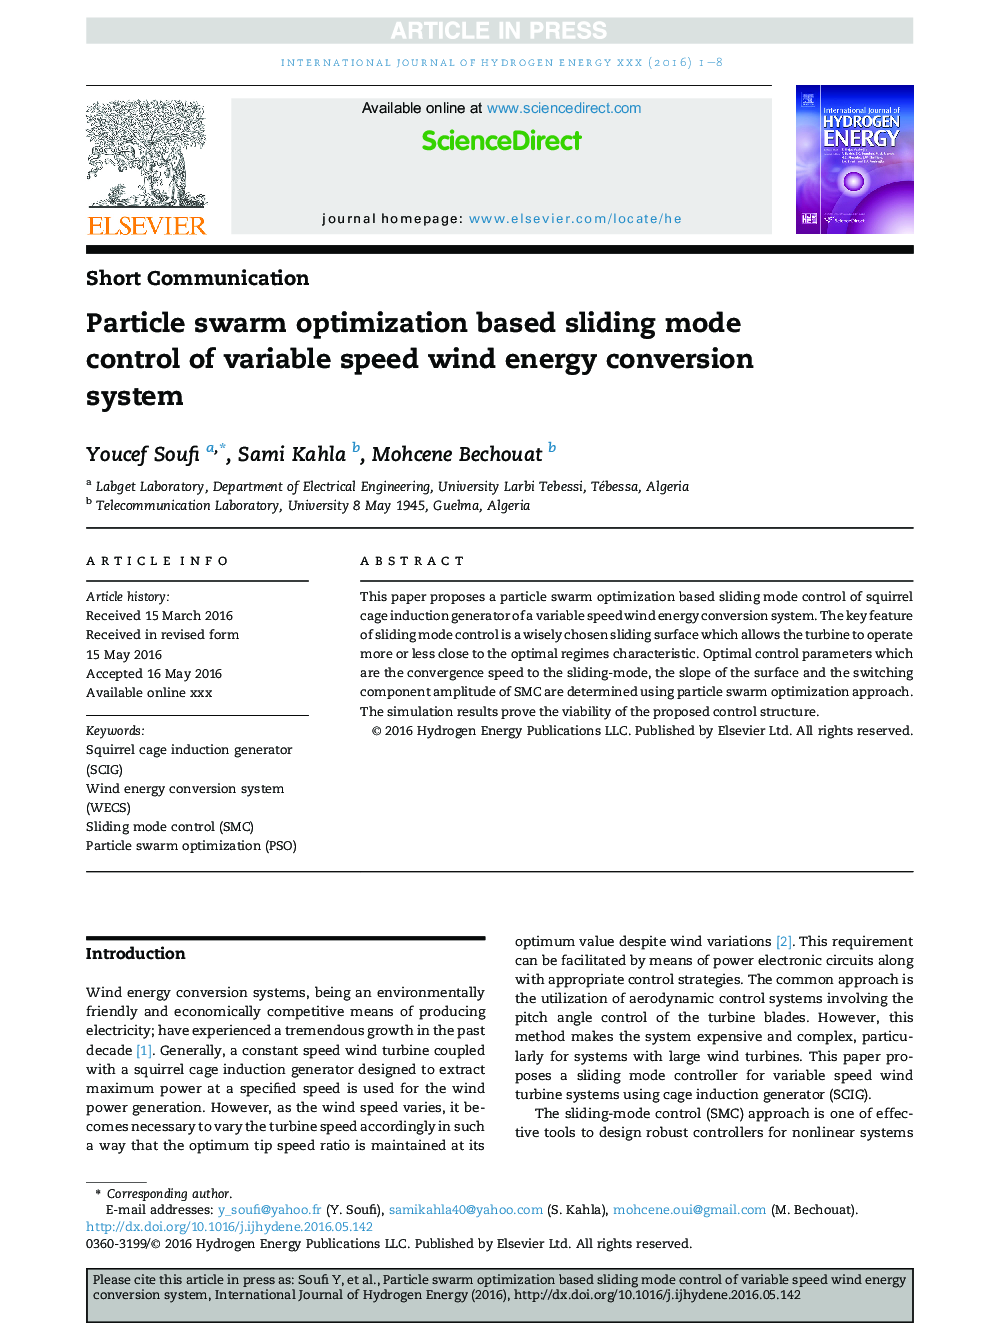 Particle swarm optimization based sliding mode control of variable speed wind energy conversion system